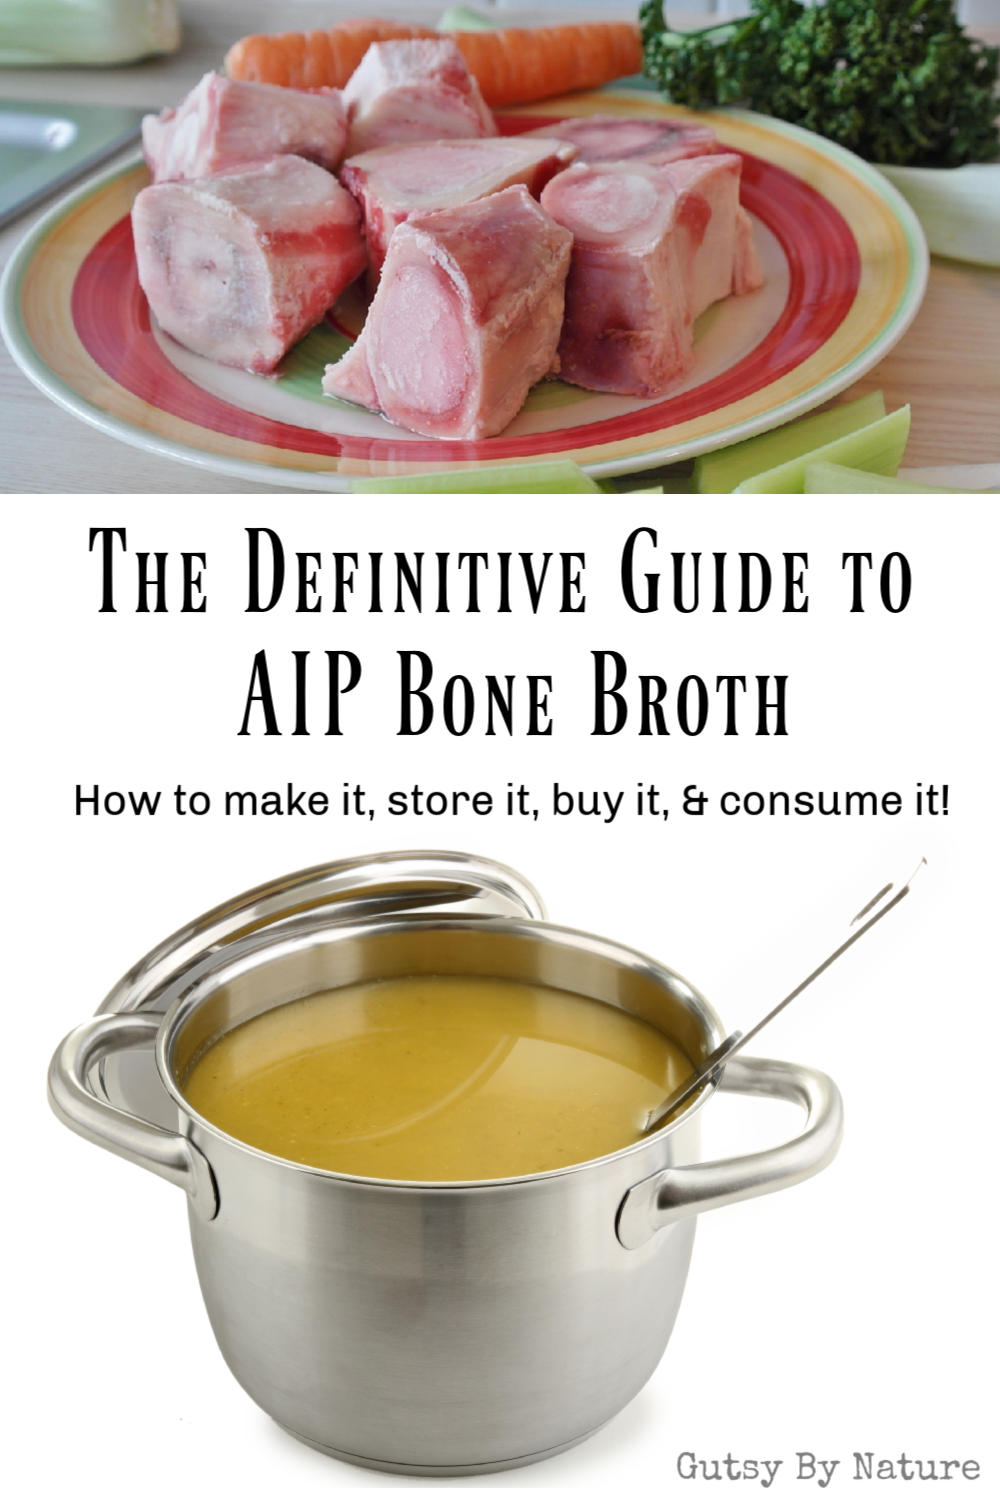 The Definitive Guide to AIP Bone Broth